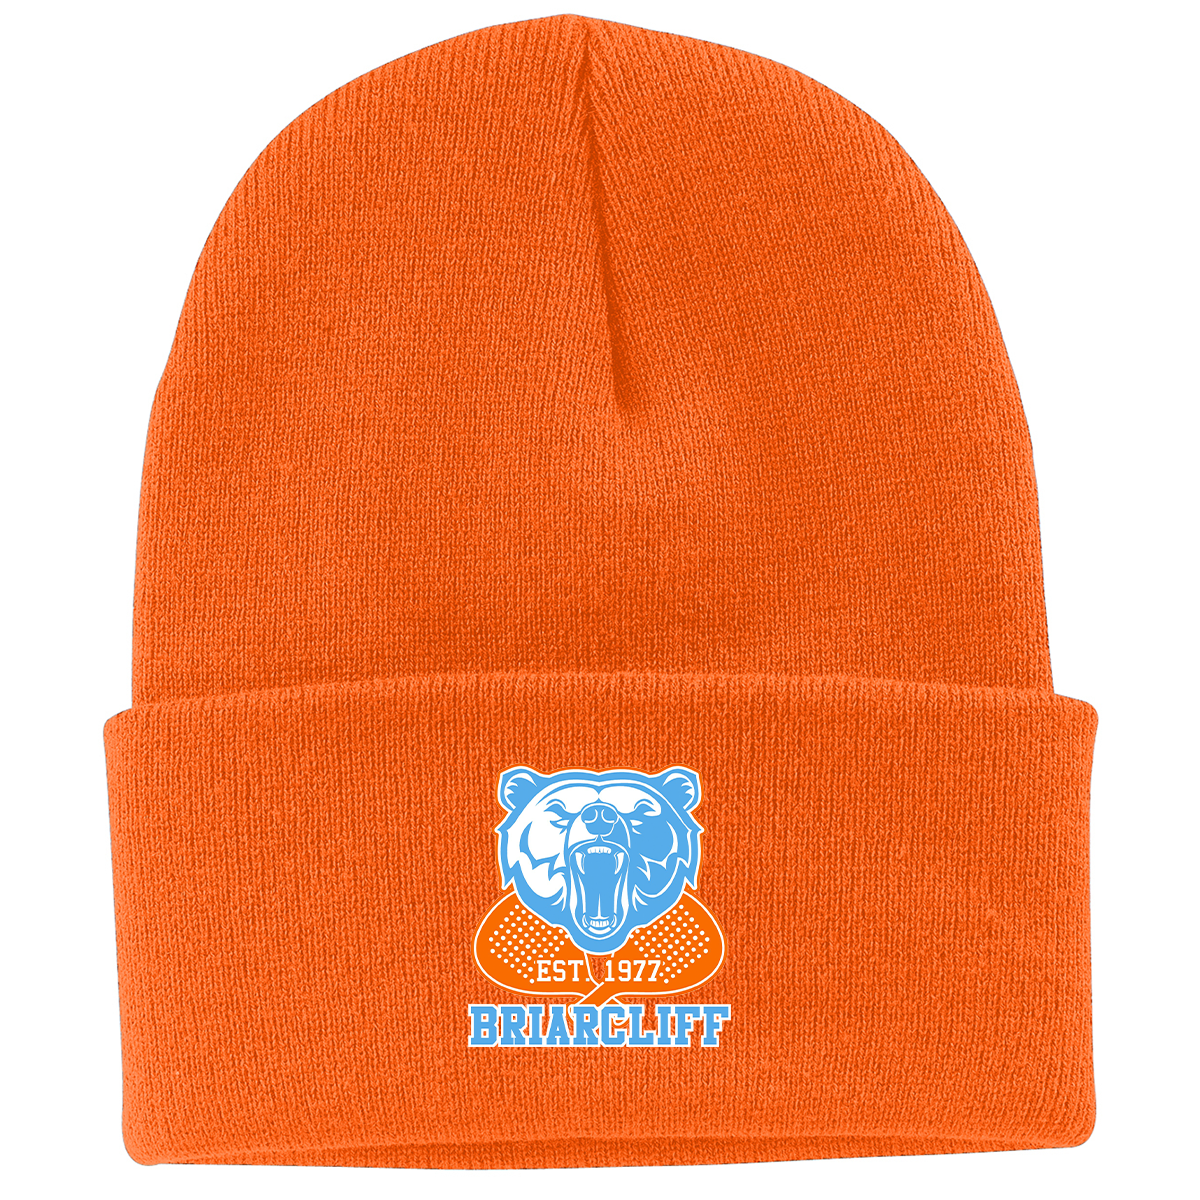 Briarcliff Paddle Knit Beanie